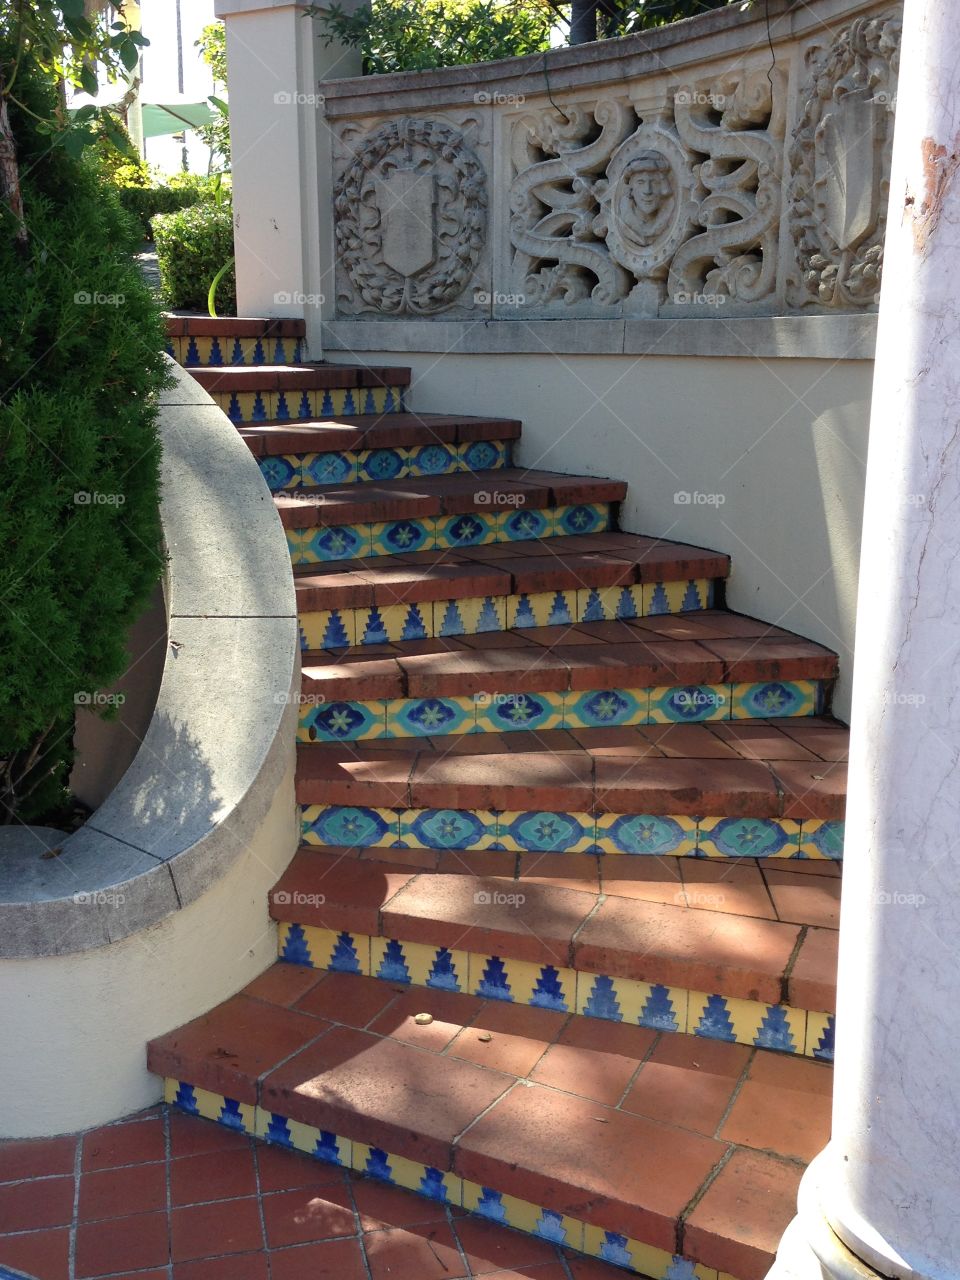 Stairways and tiles